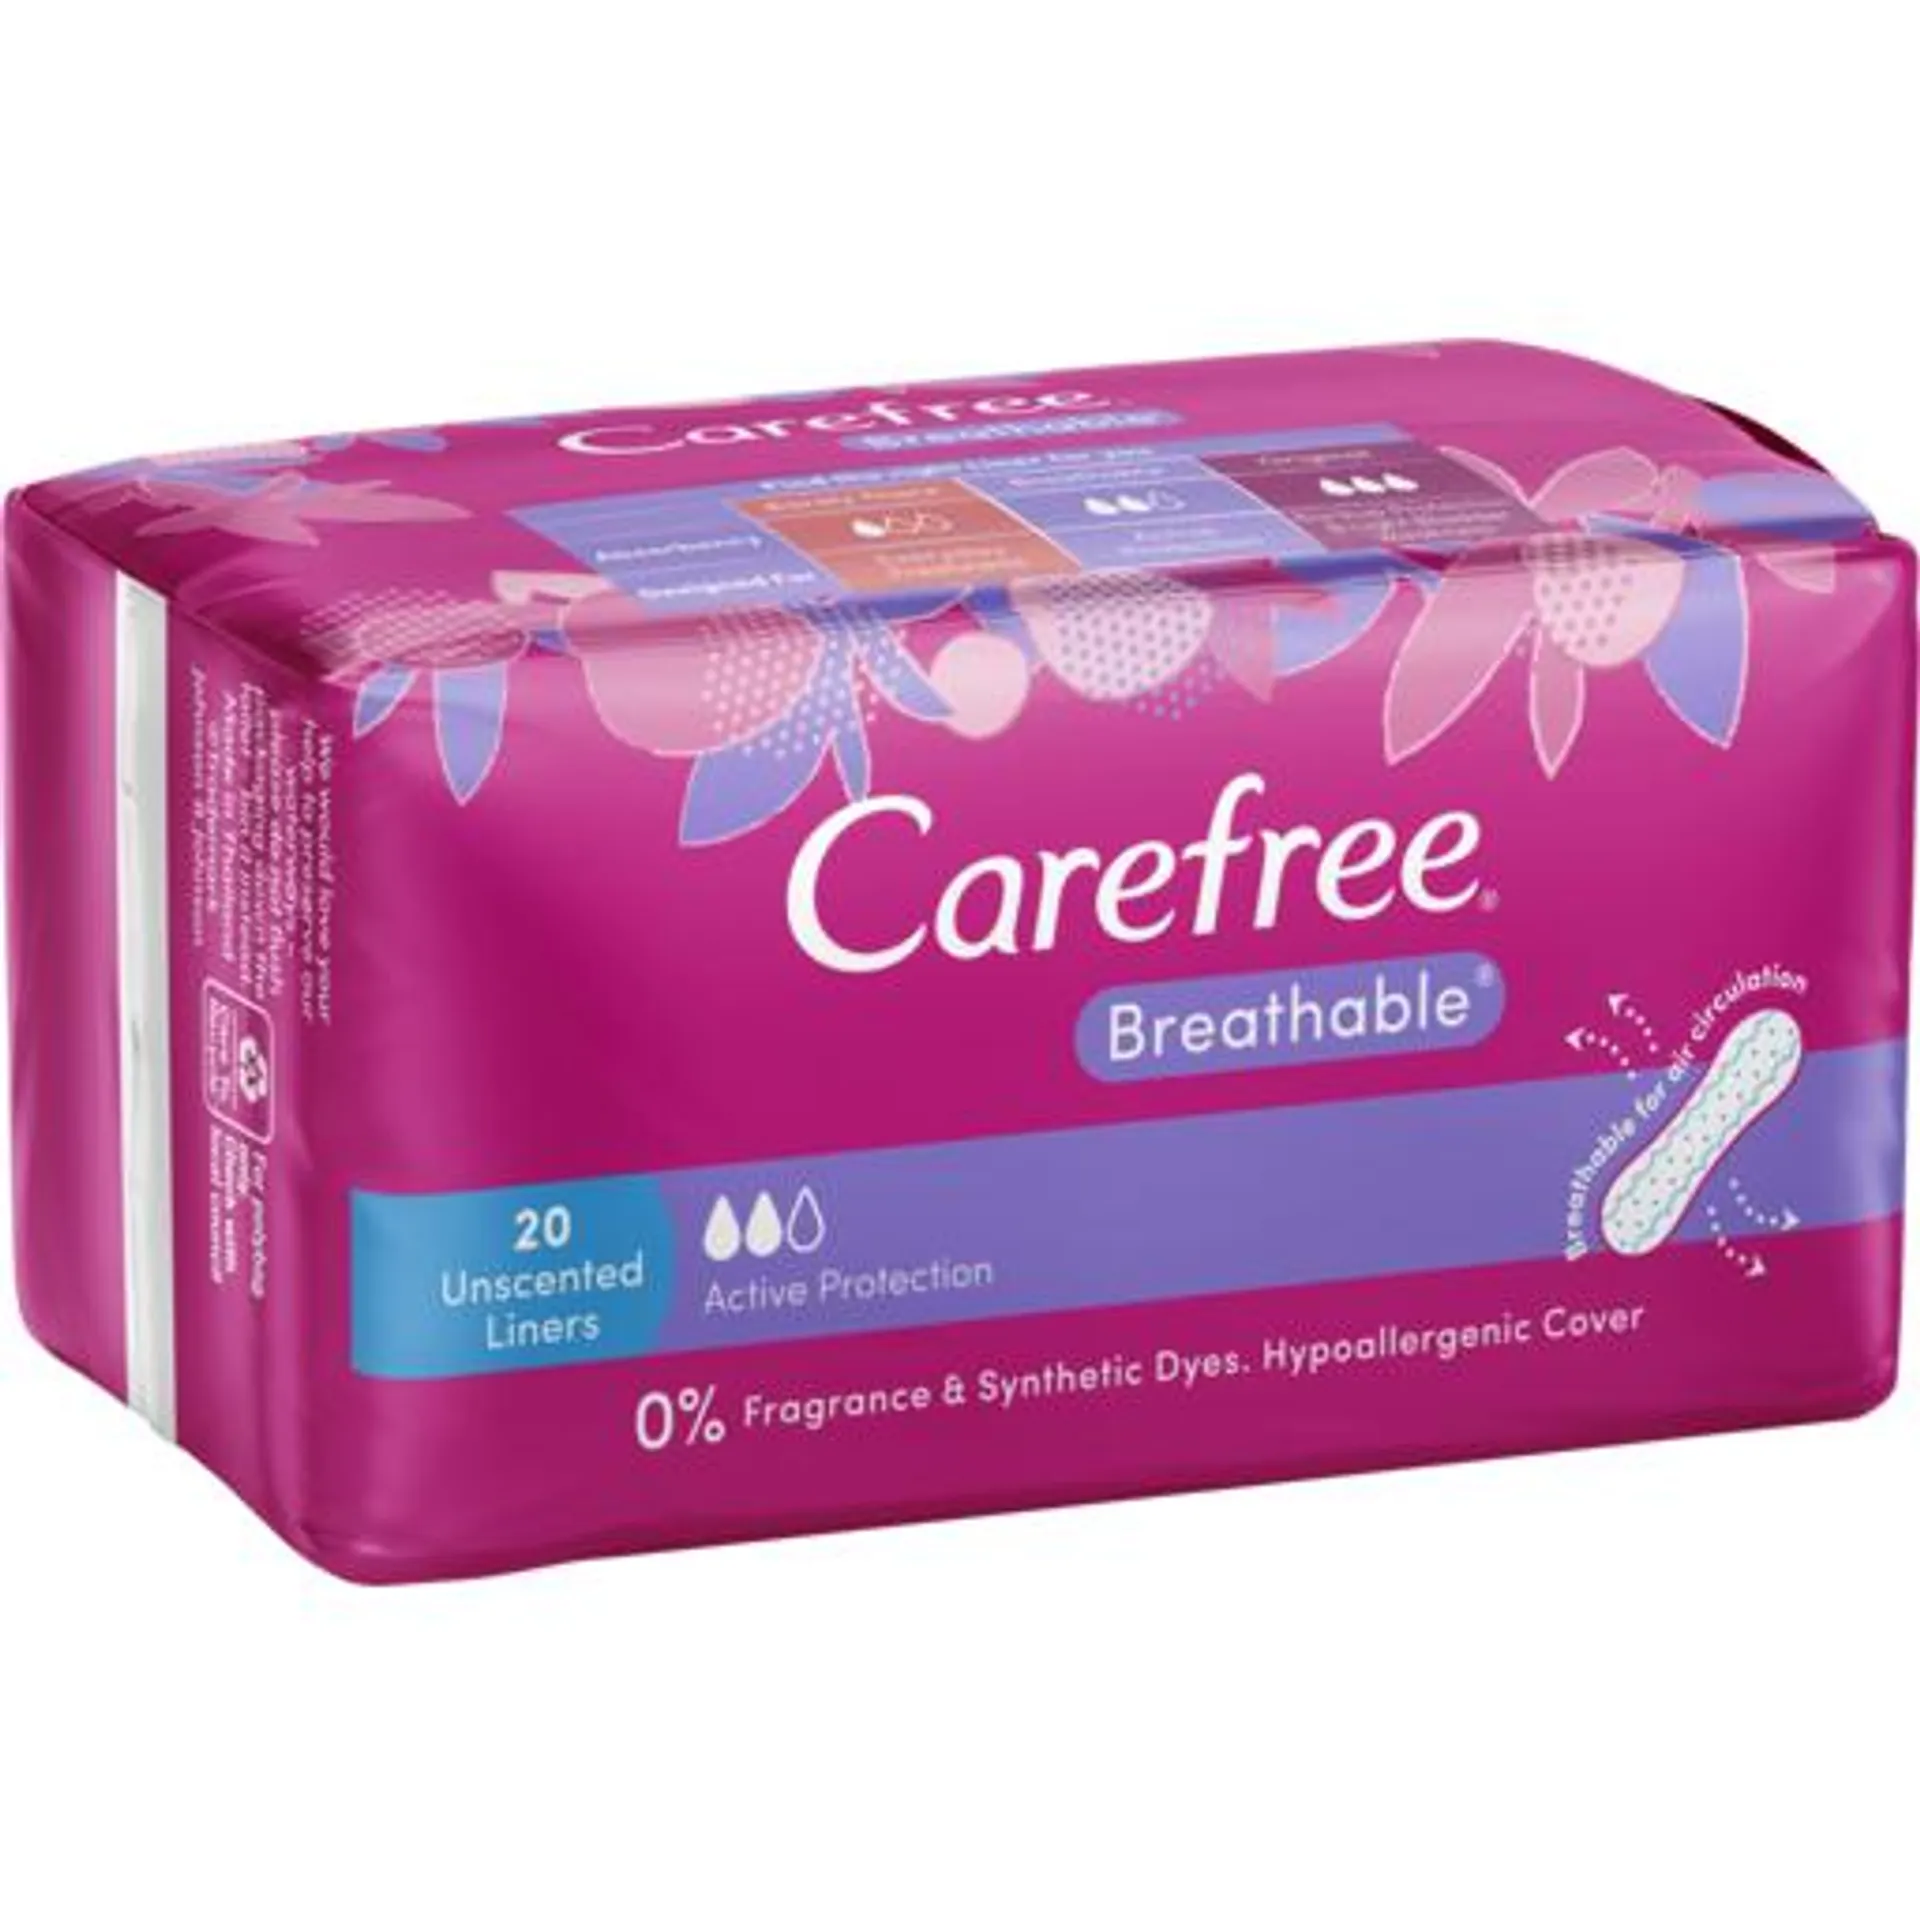 Carefree Liners Breathable 20 Pack